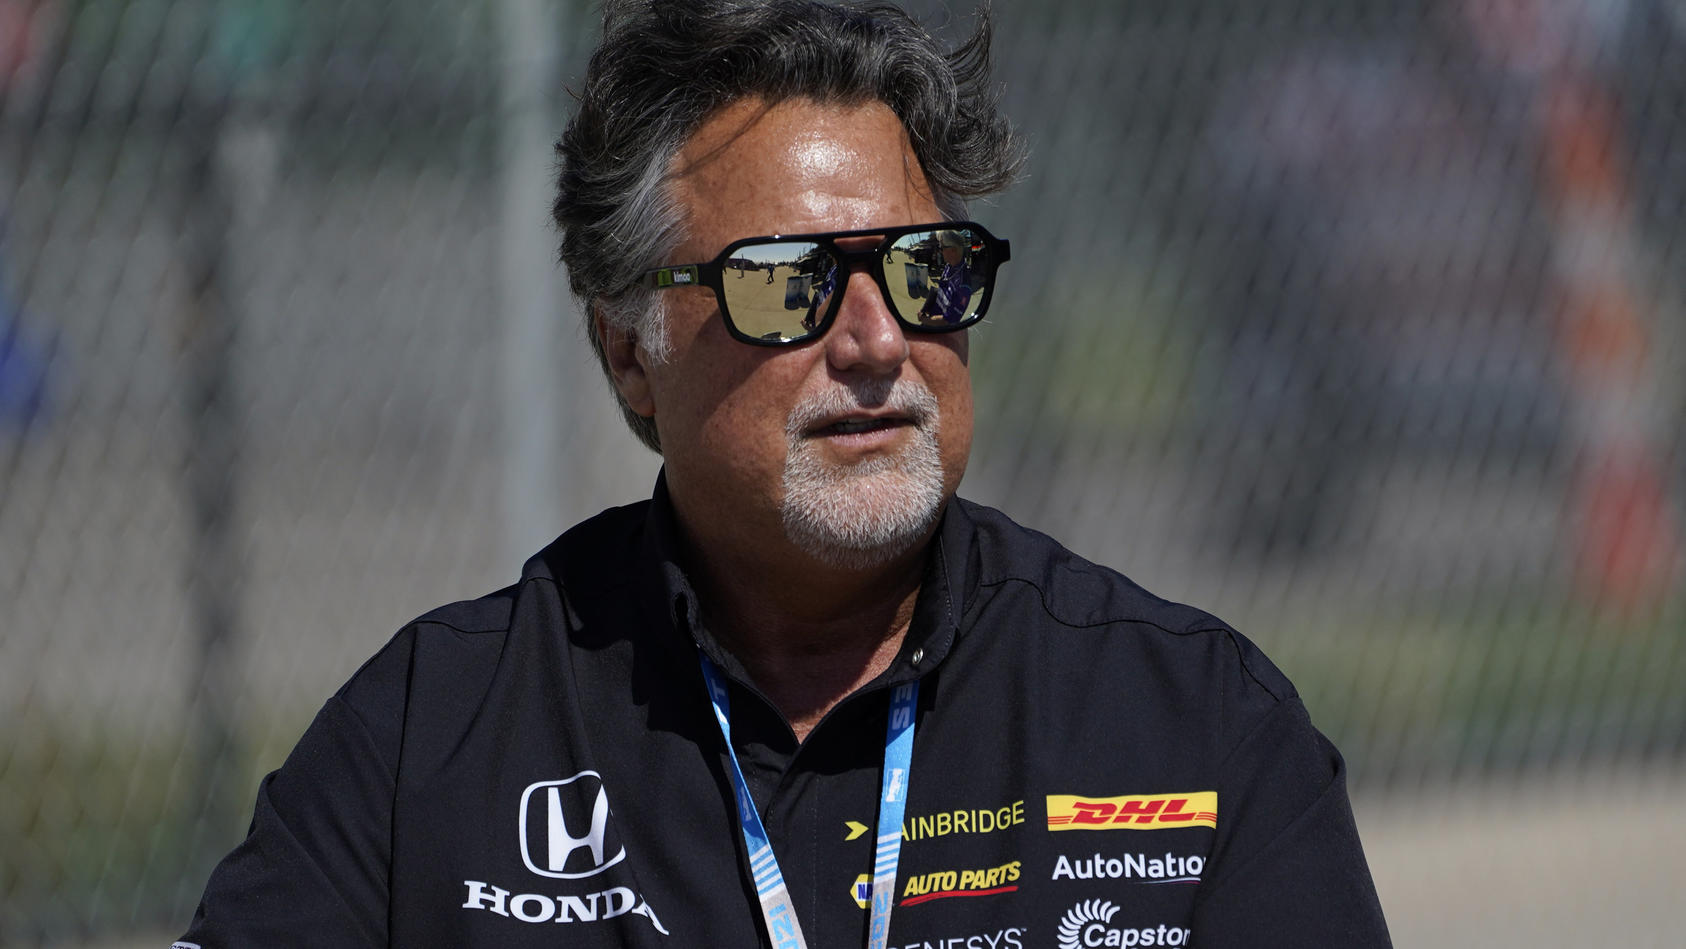 FILE - Team owner Michael Andretti looks on during practice for the IndyCar Detroit Grand Prix auto racing doubleheader on Belle Isle in Detroit, on June 11, 2021. General Motors will attempt to enter Formula One by partnering with Andretti Global un